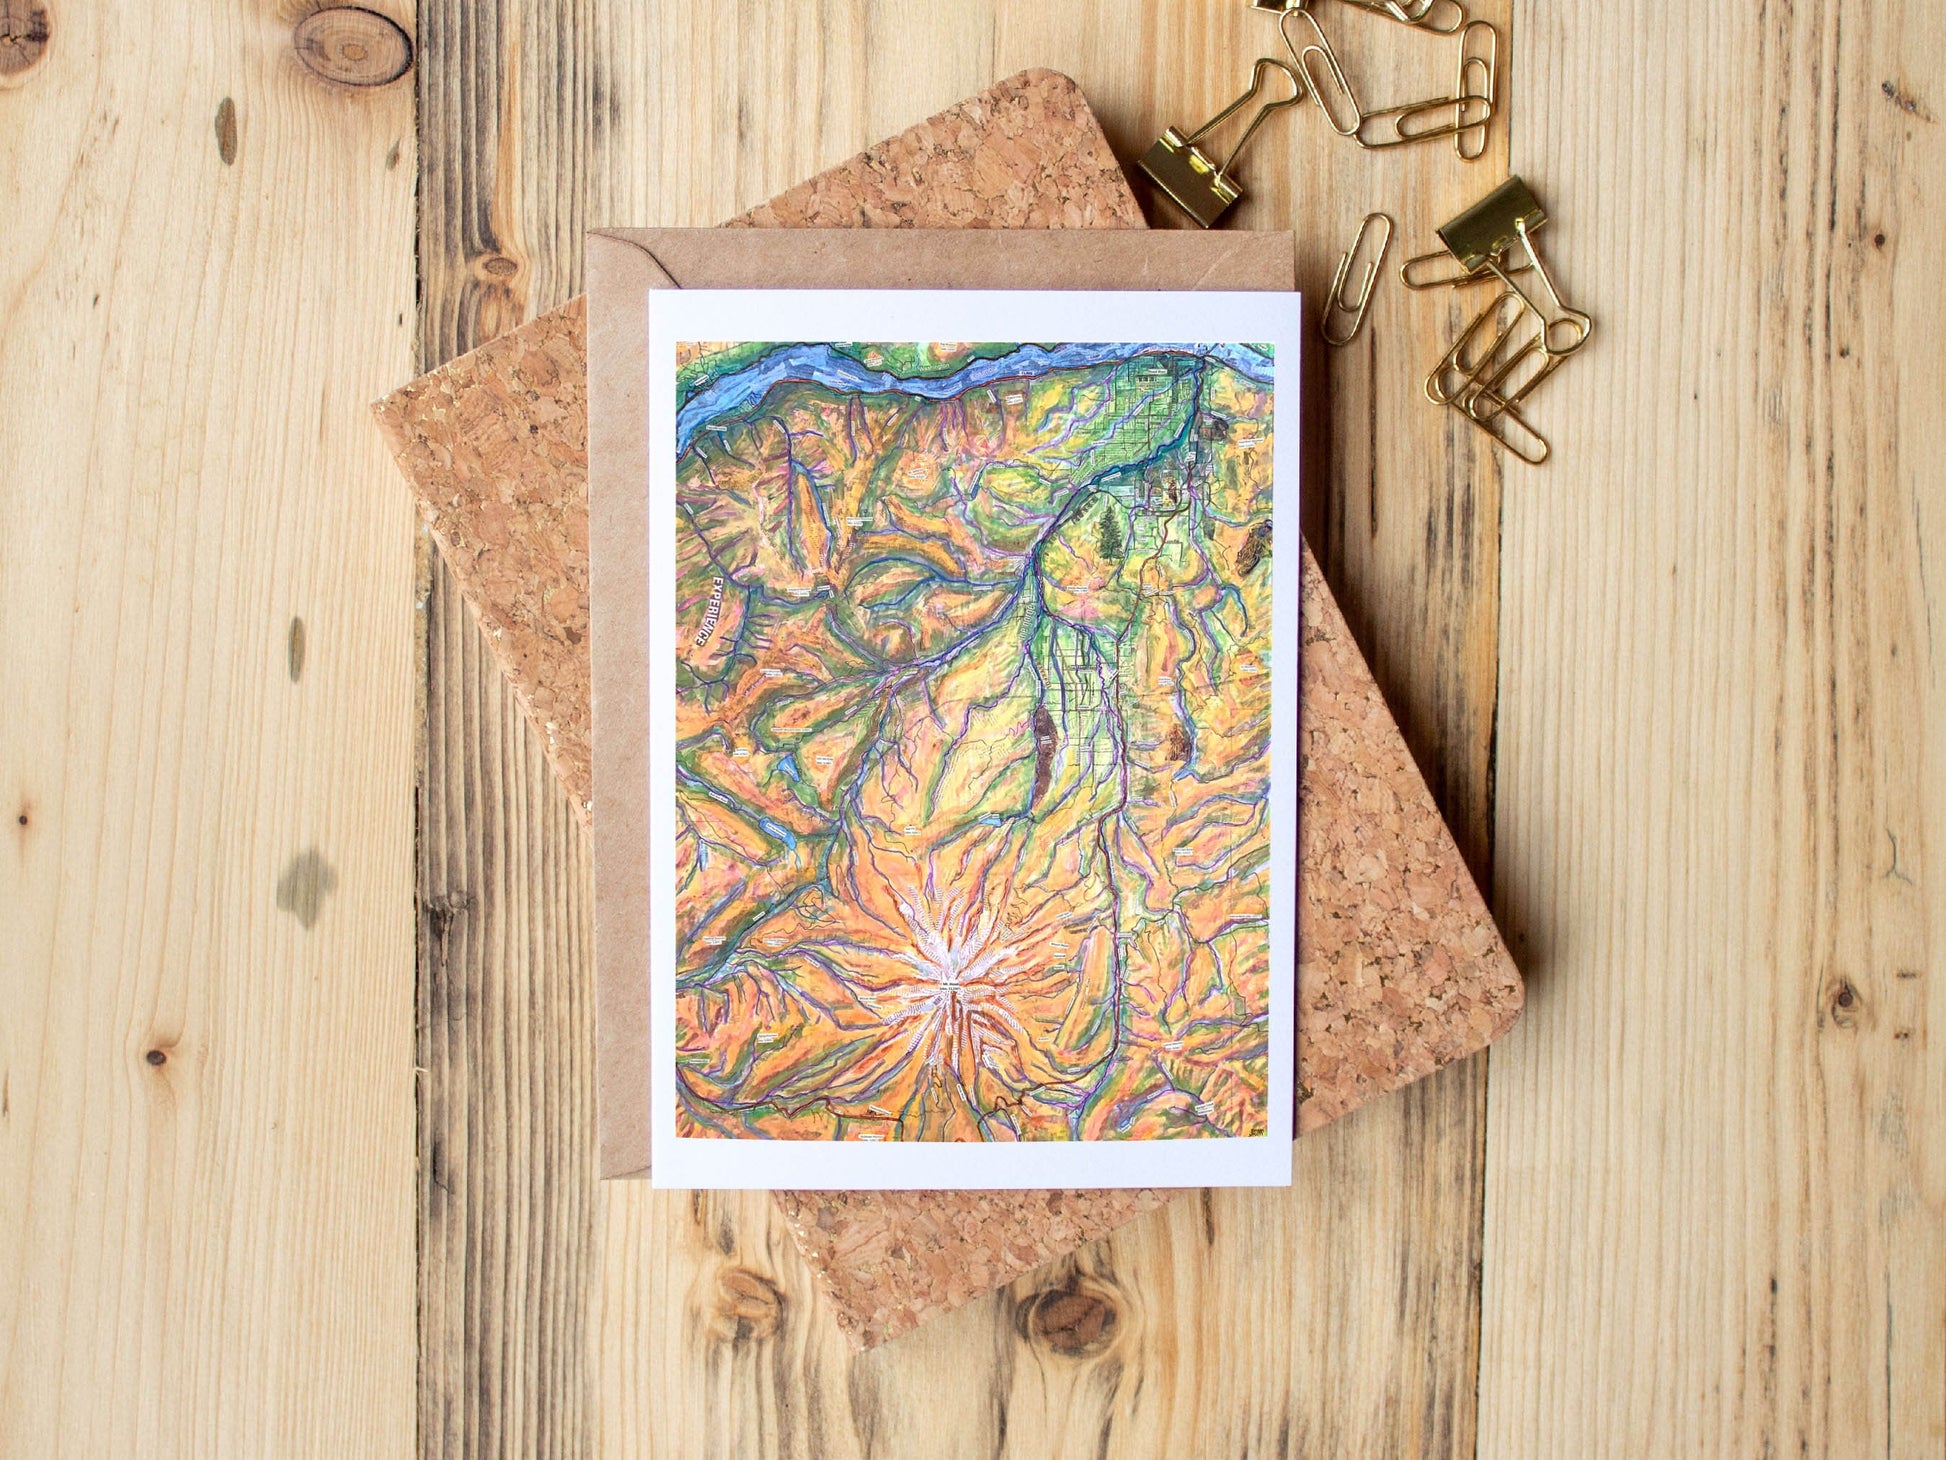 Greeting Card of Hood River Valley Topo Map Collage - Order a Custom Design for Your Home Town! - Blank Inside